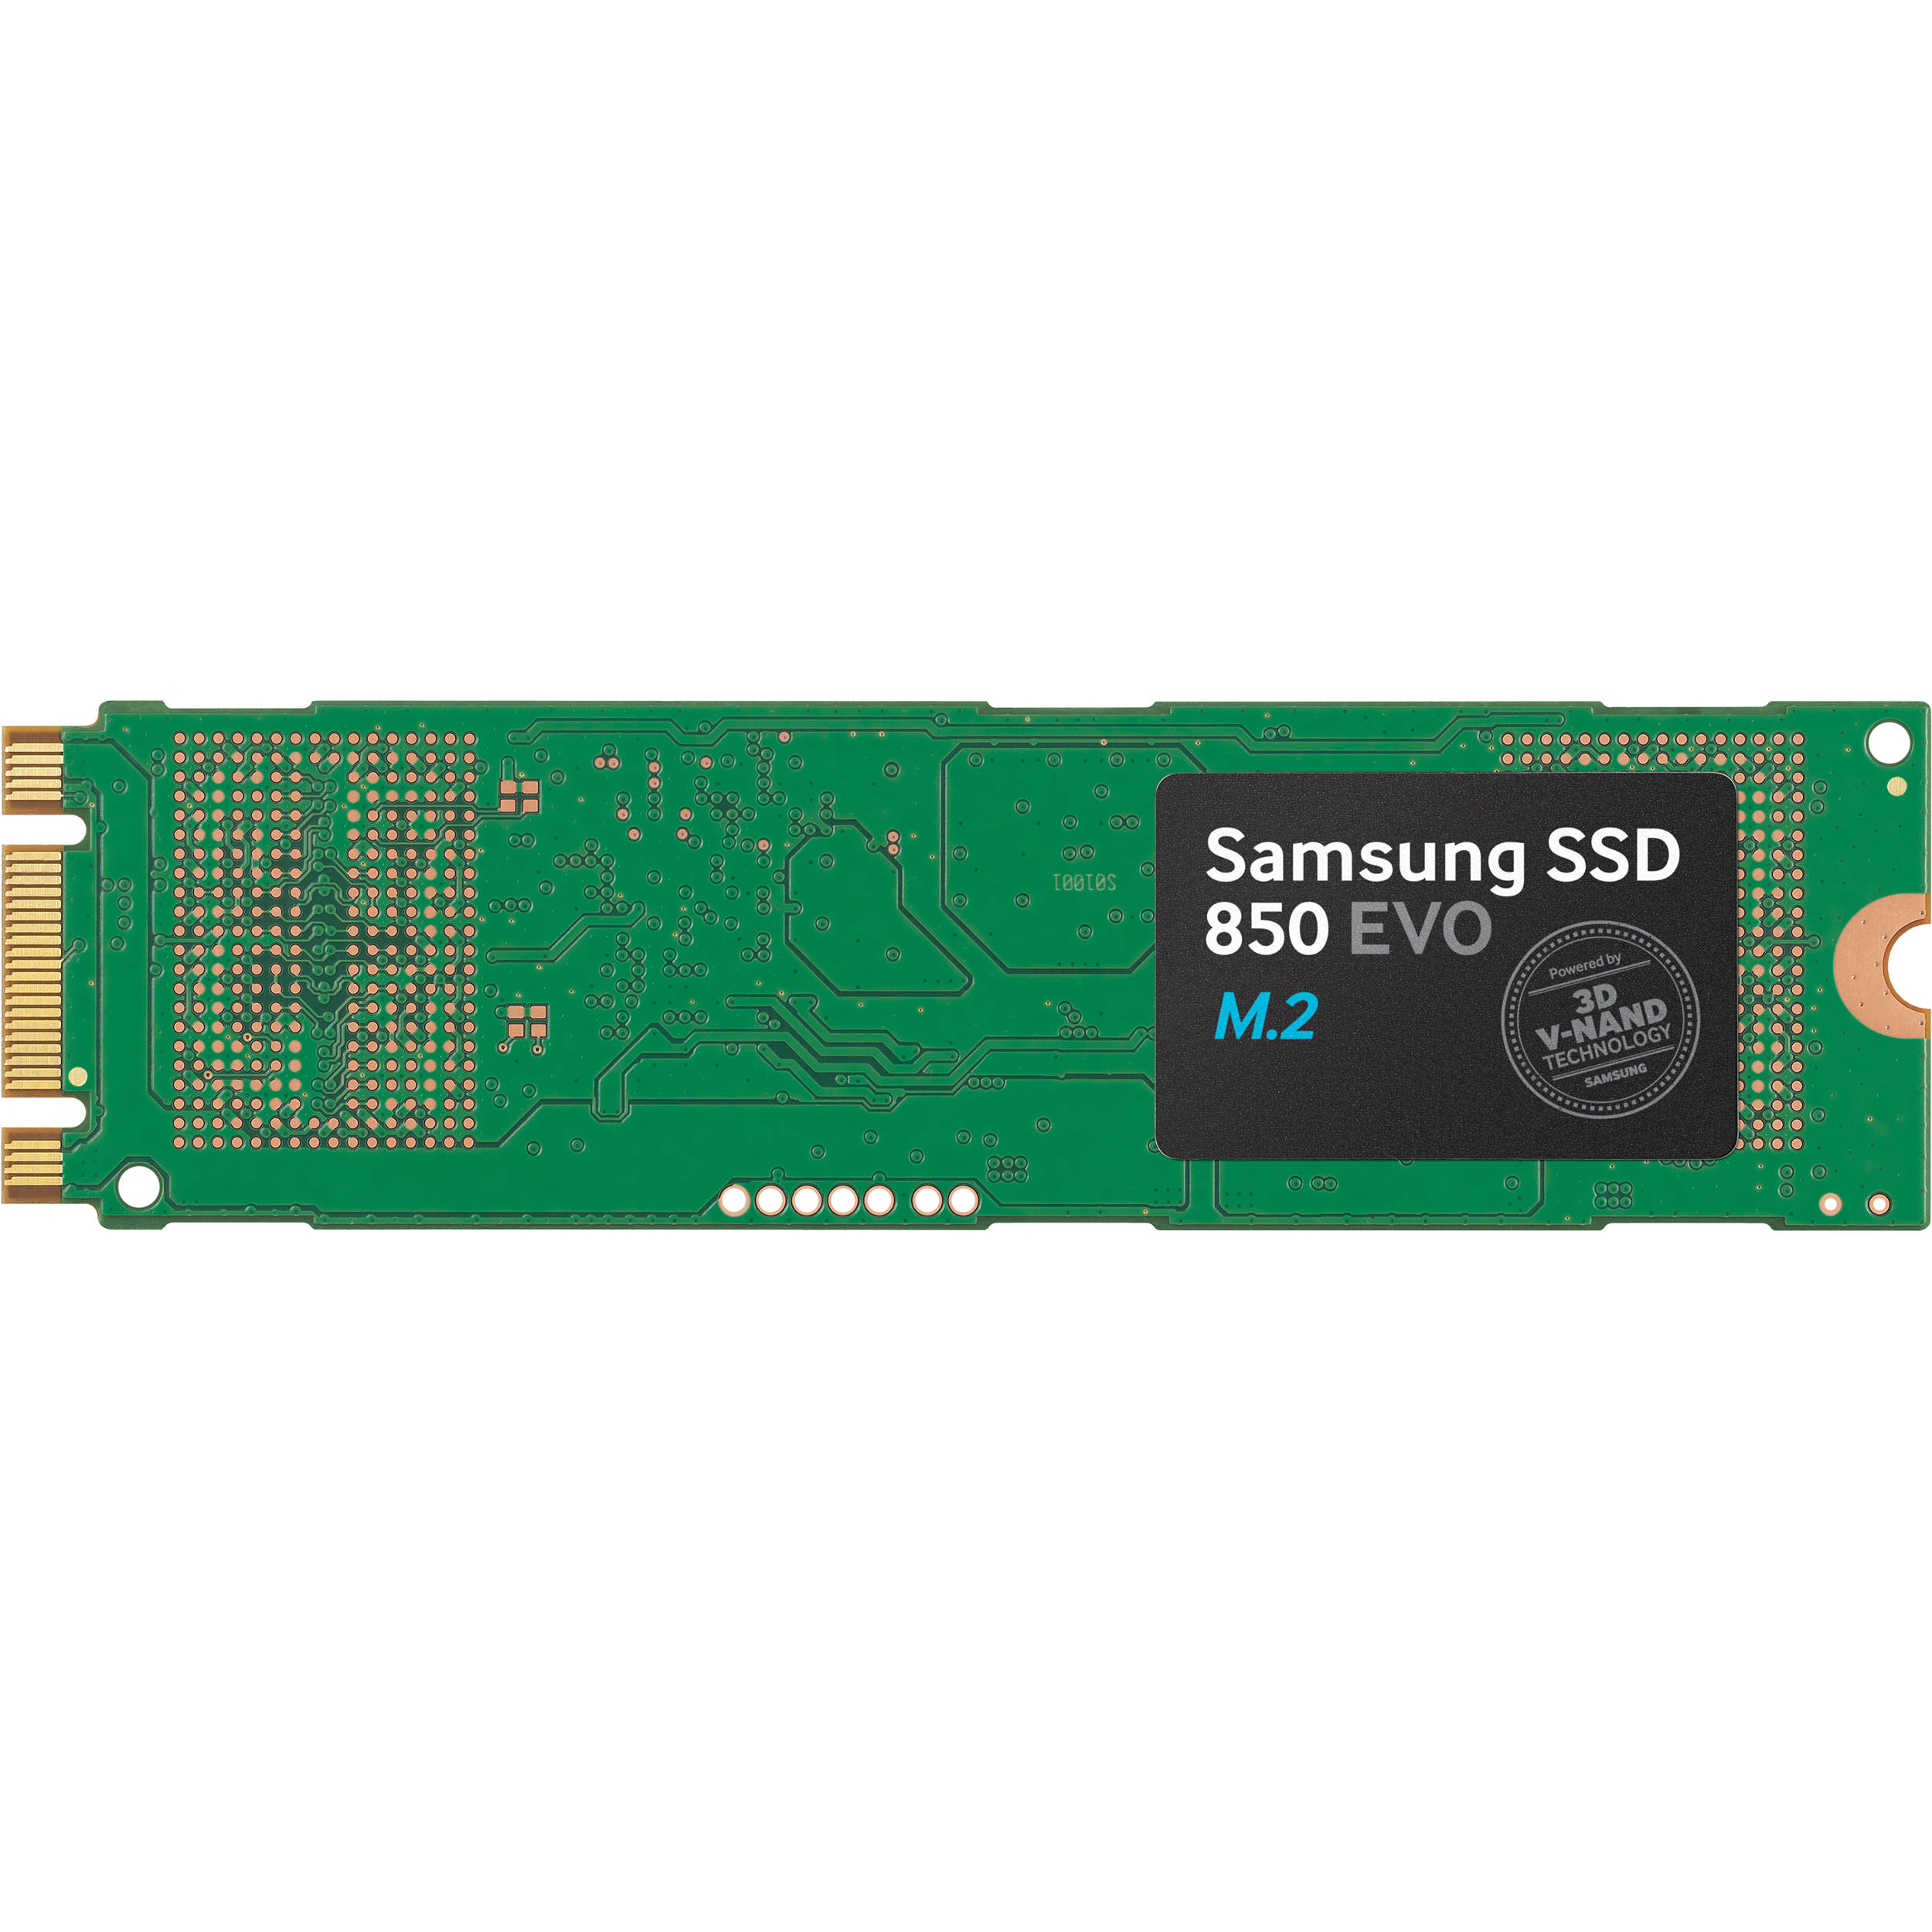 migrate to samsung ssd